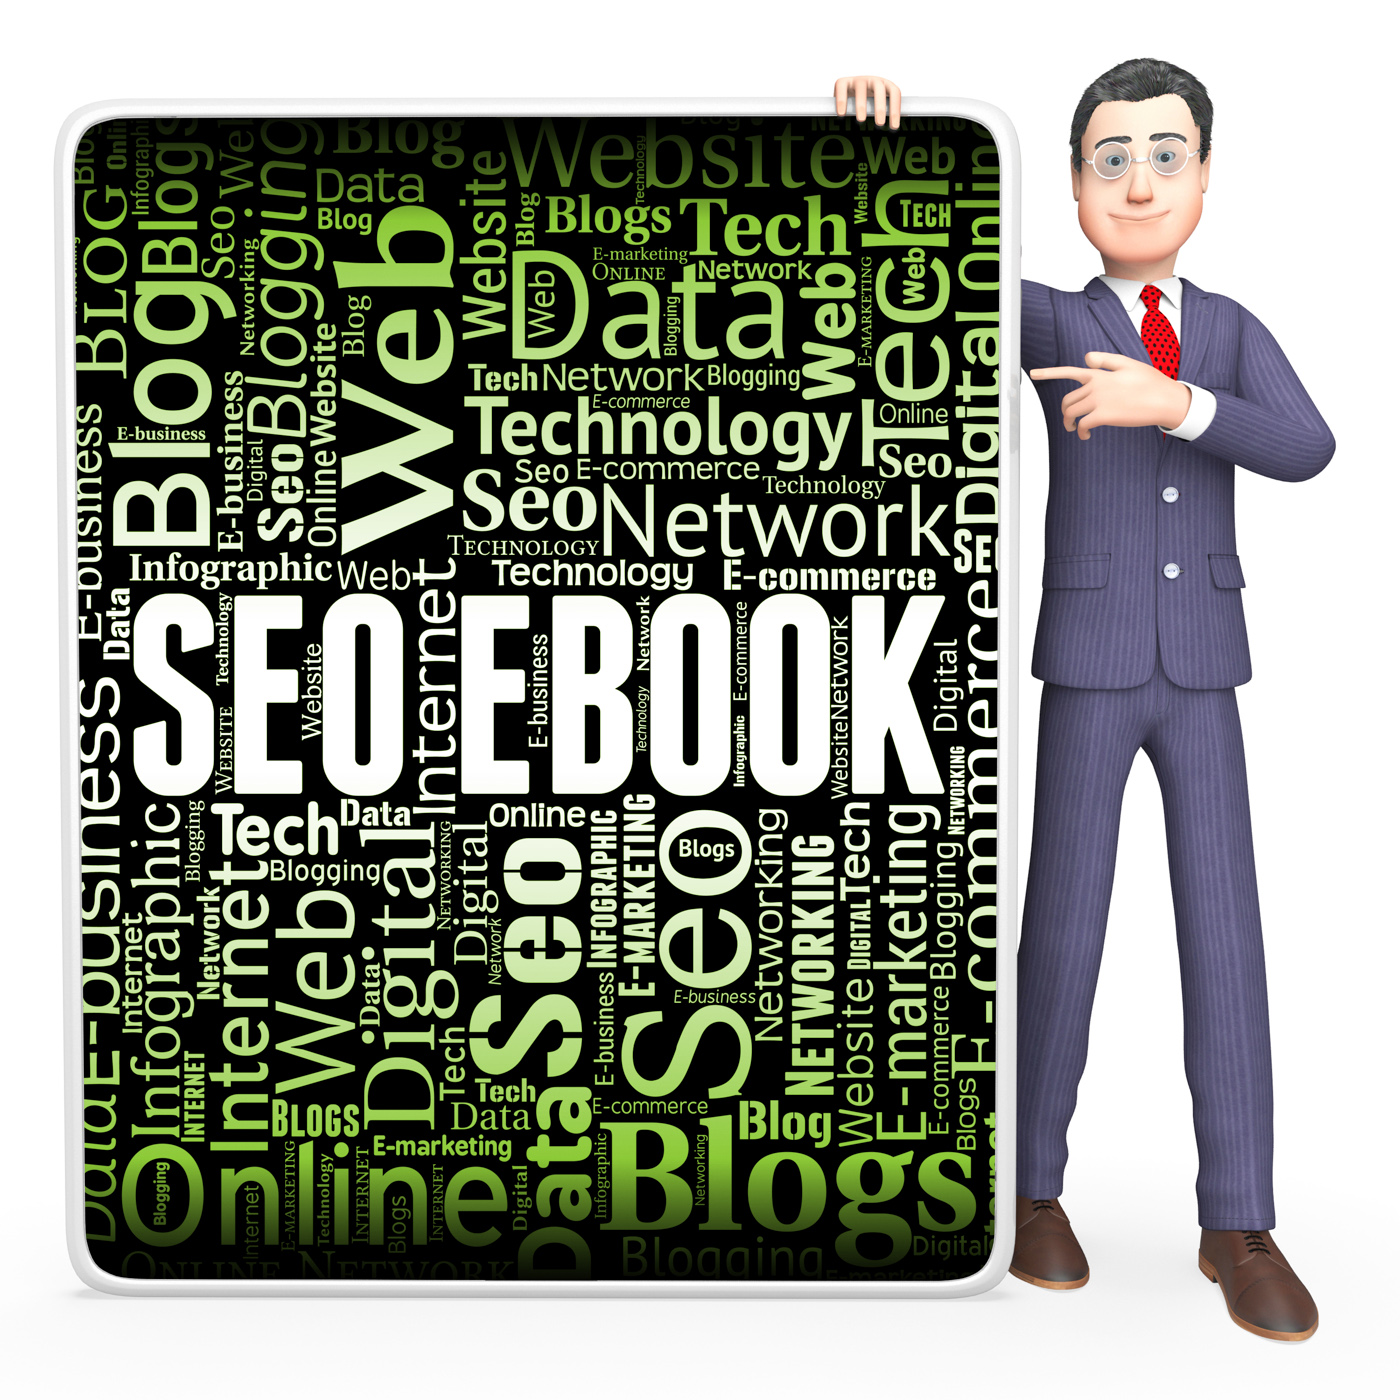 Seo ebook indicates search engines and books photo